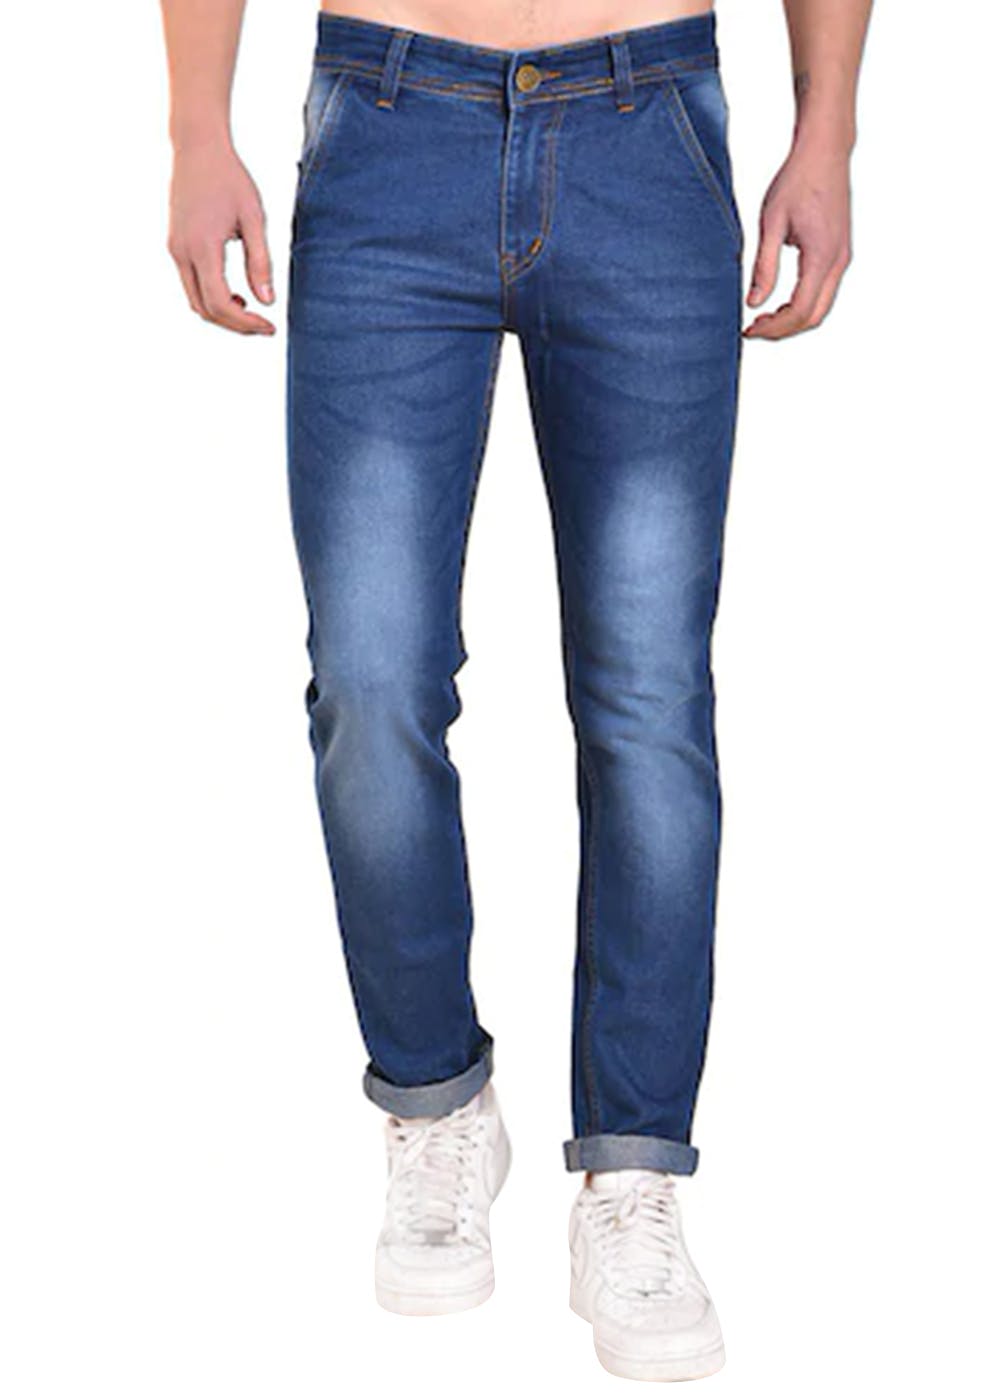 Get Denim Heavy Washed Jeans at ₹ 749 | LBB Shop